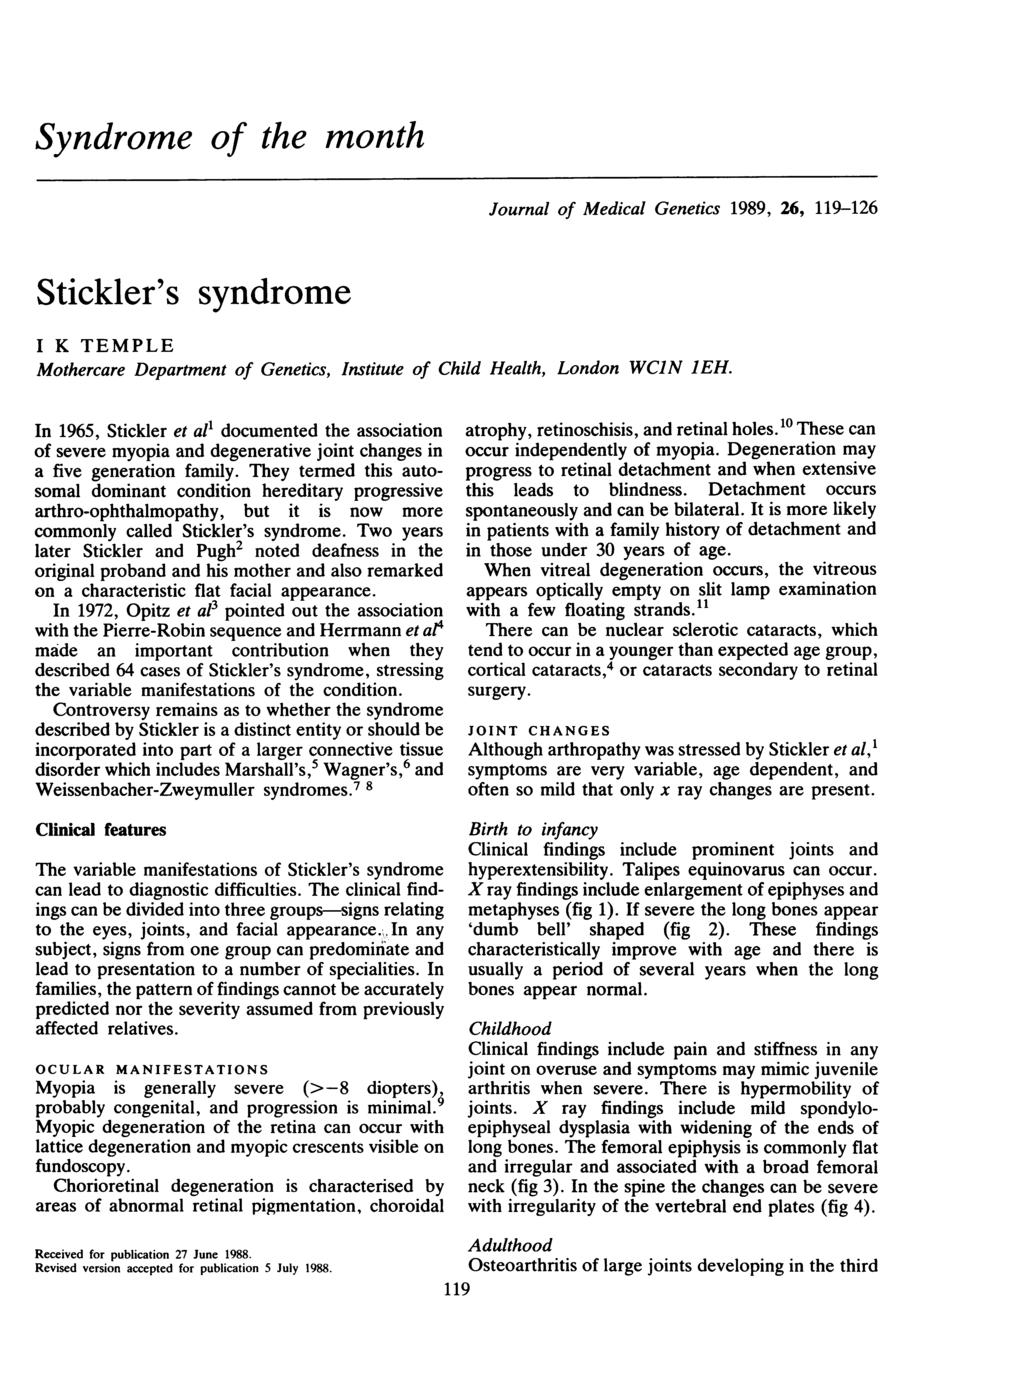 Syndrome of the Stickler's syndrome month Journal of Medical Genetics 1989, 26, 119-126 I K TEMPLE Mothercare Department of Genetics, Institute of Child Health, London WCIN IEH.